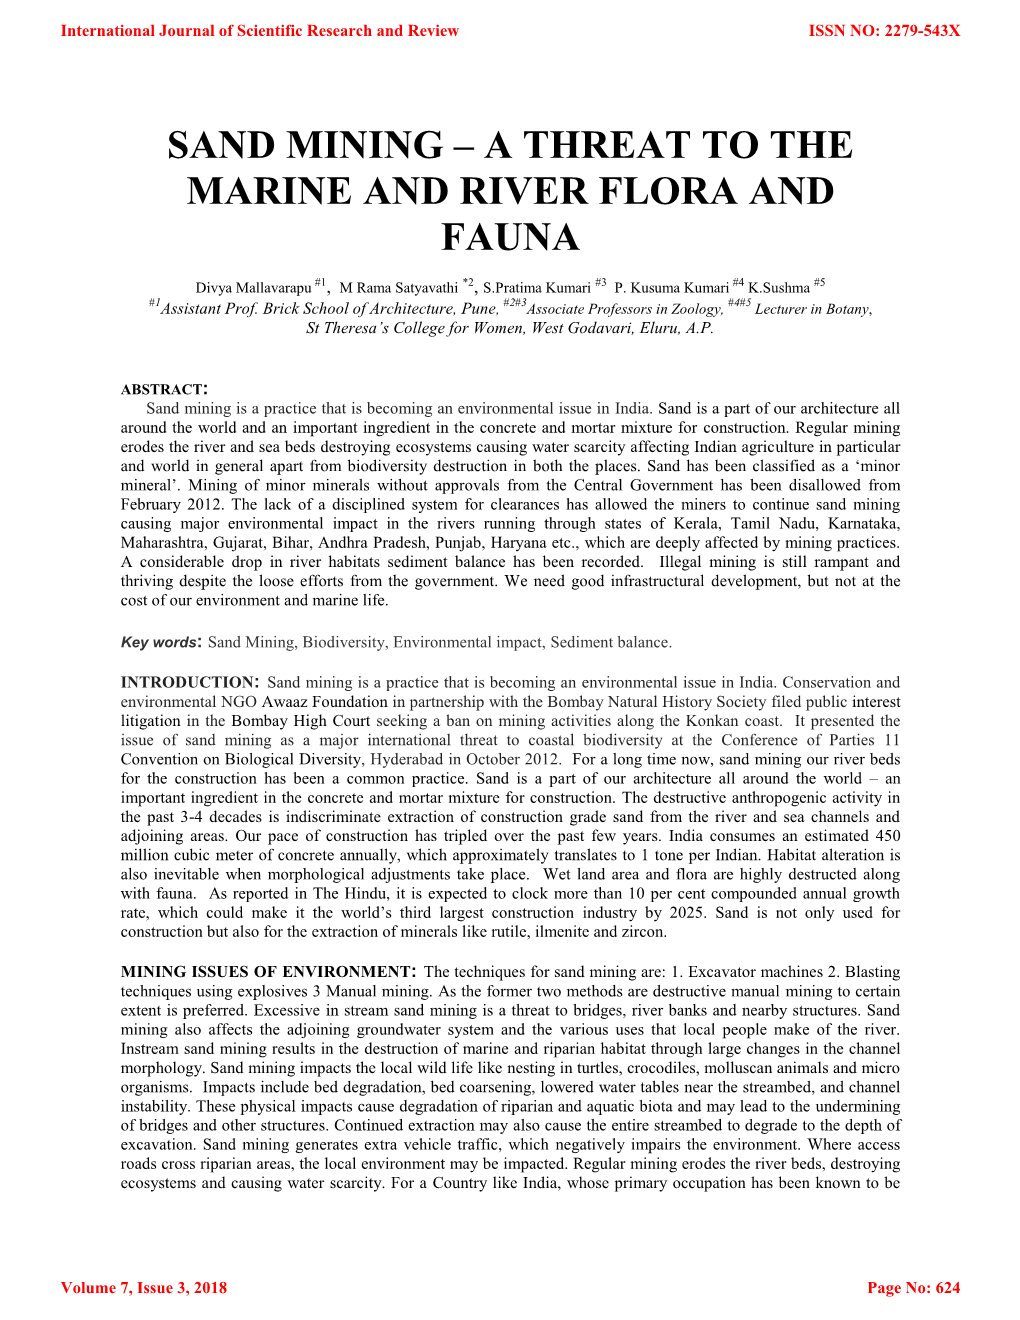 Sand Mining – a Threat to the Marine and River Flora and Fauna